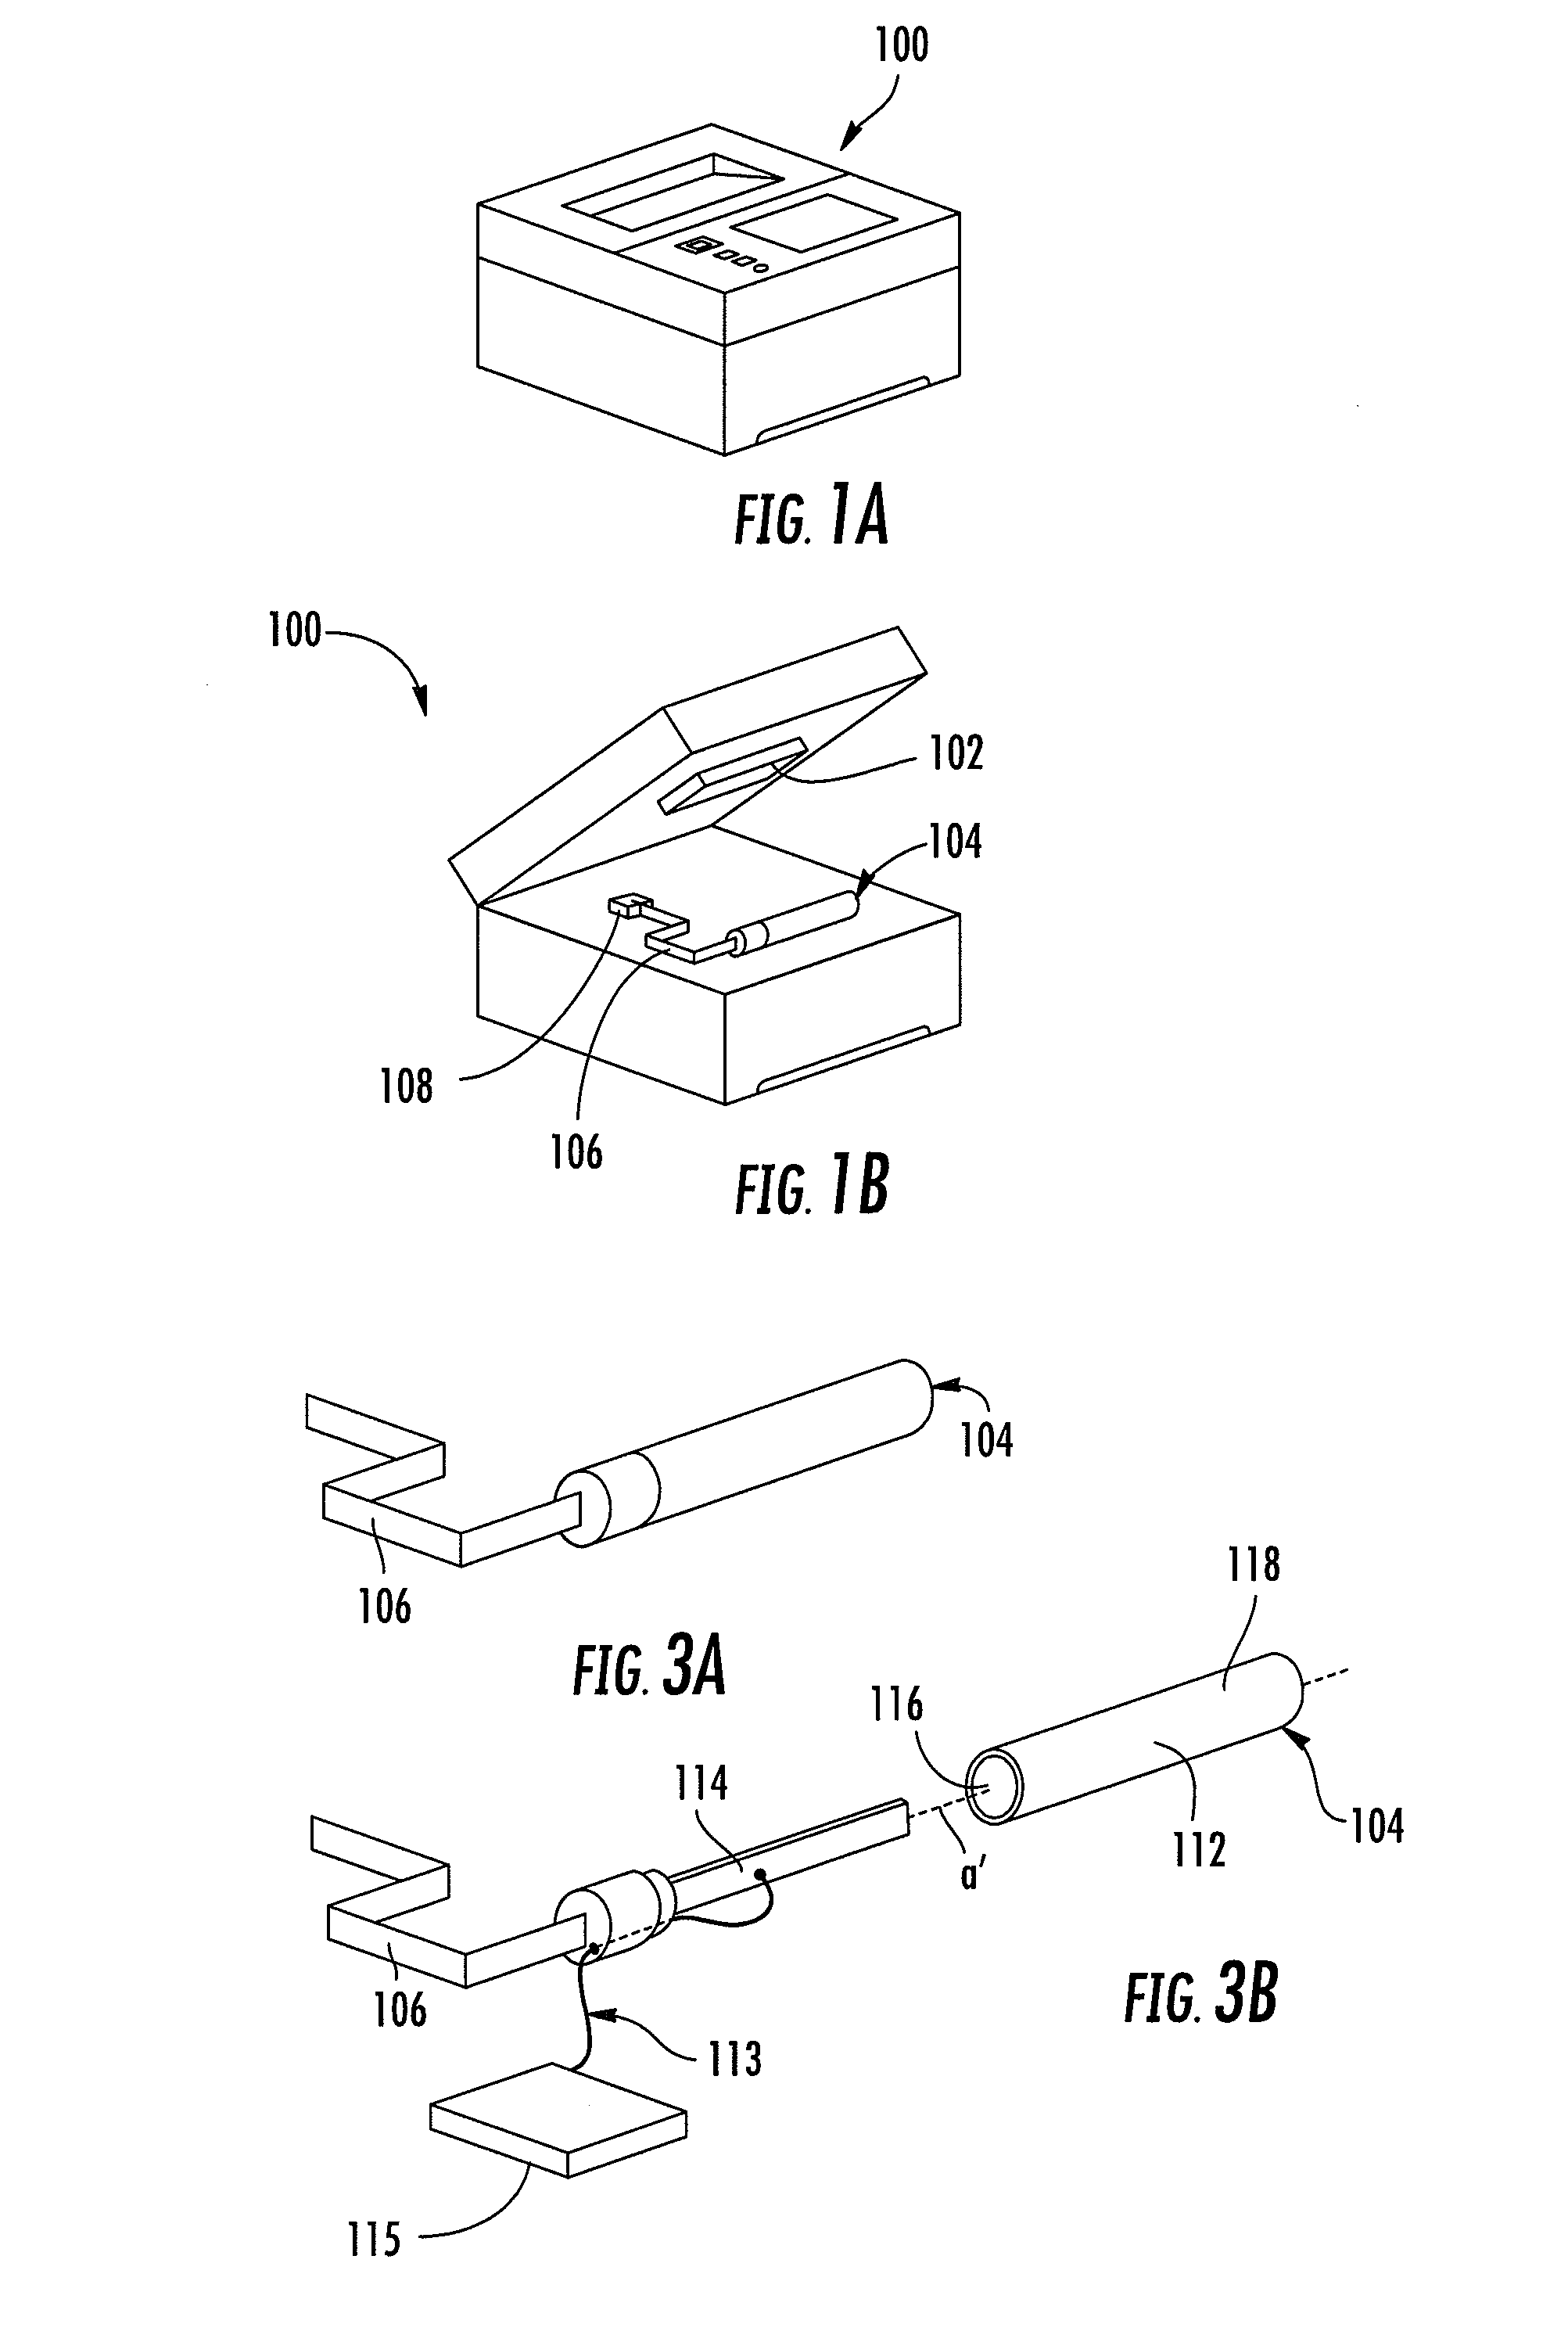 Platen incorporating an RFID coupling device